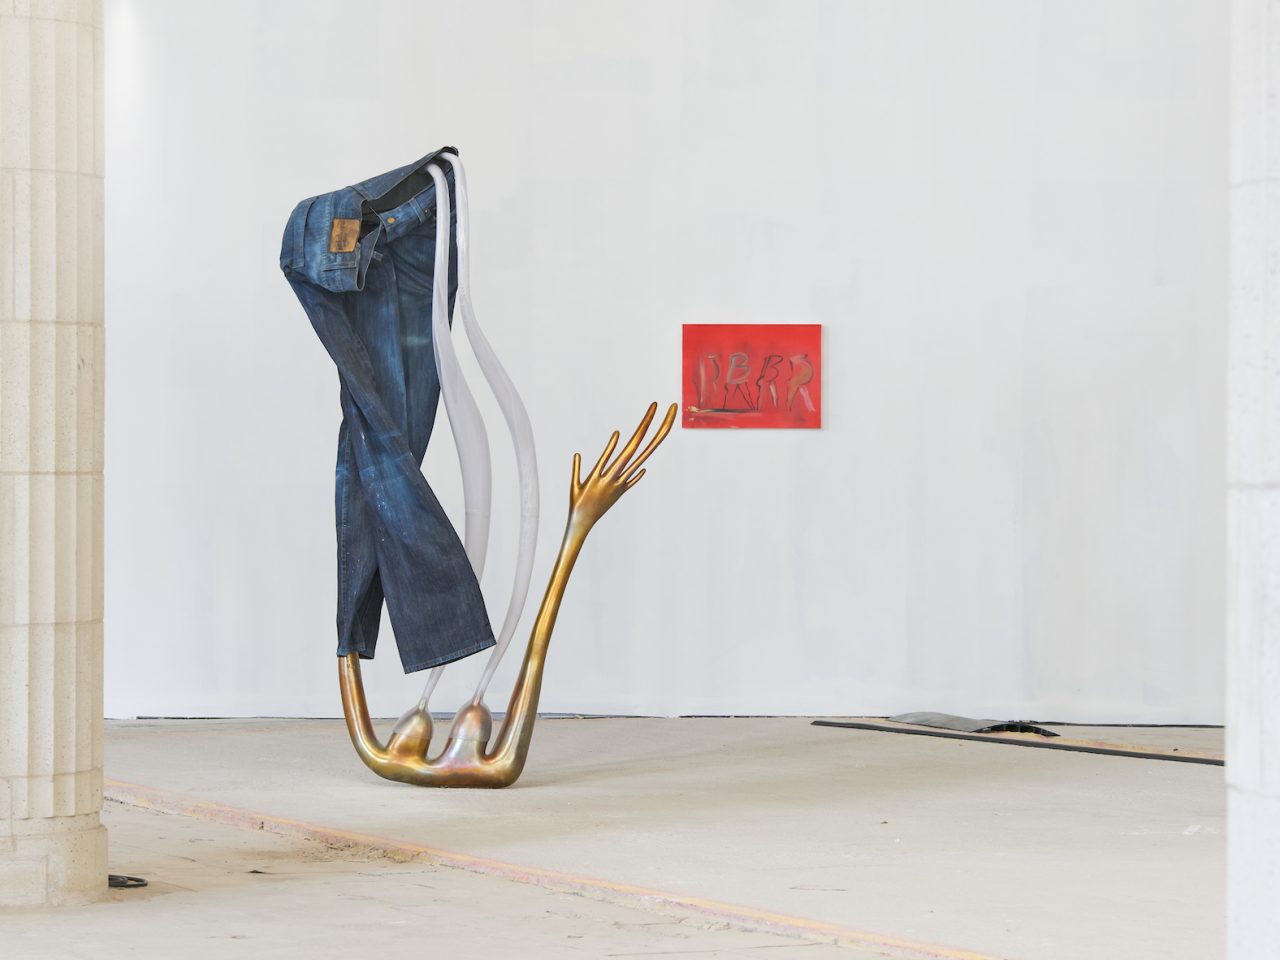 A tall sculpture with long gold arms reaching up with a hand pointing upwards. There are a pair of blue jeans draped over the top and coming out of the jeans are a milky white to clear plastic, shaped as if it were a pouring liquid.